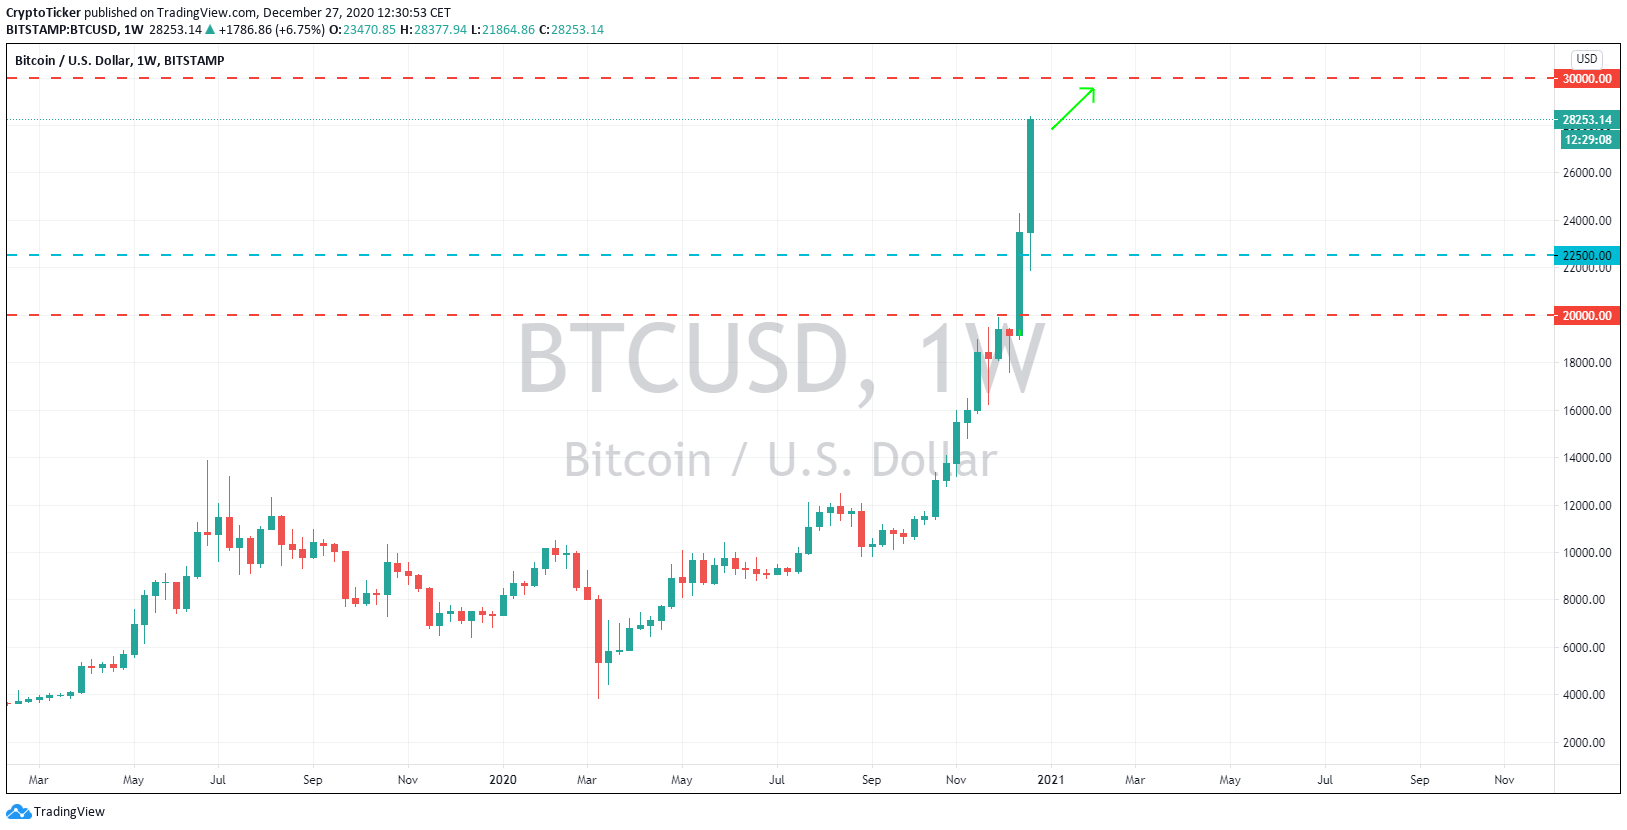 BTC/USD 1-Week chart, USD 30,000 almost reached